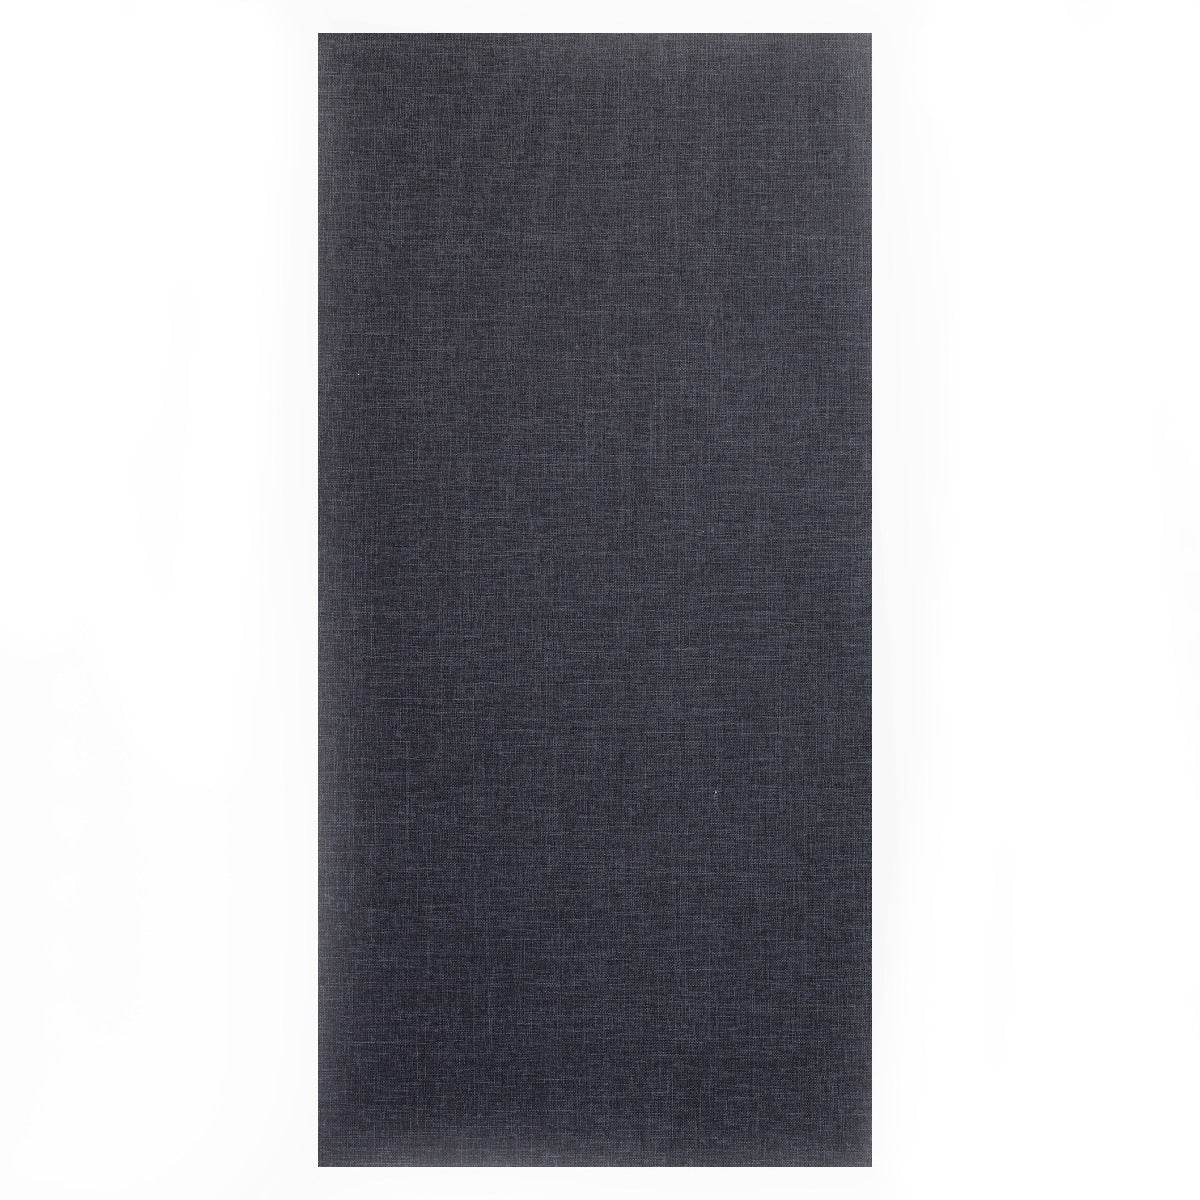 Primacoustic Broadway Fabric - Priced per linear ft - Black - 54" Wide